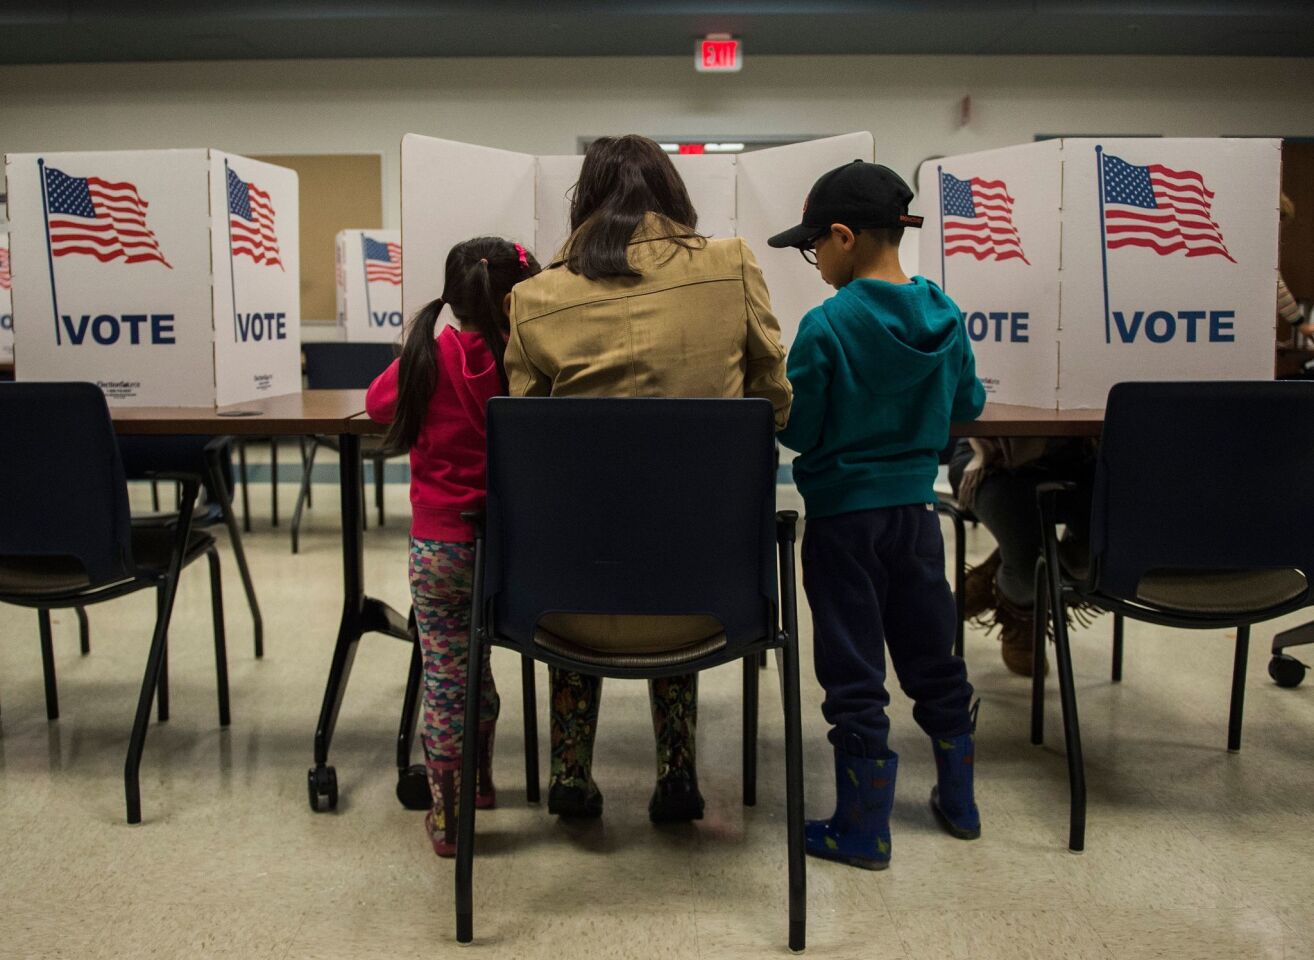 With her children as observers, a woman votes at a polling station during the midterm elections at the Fairfax County bus garage in Lorton, Va.